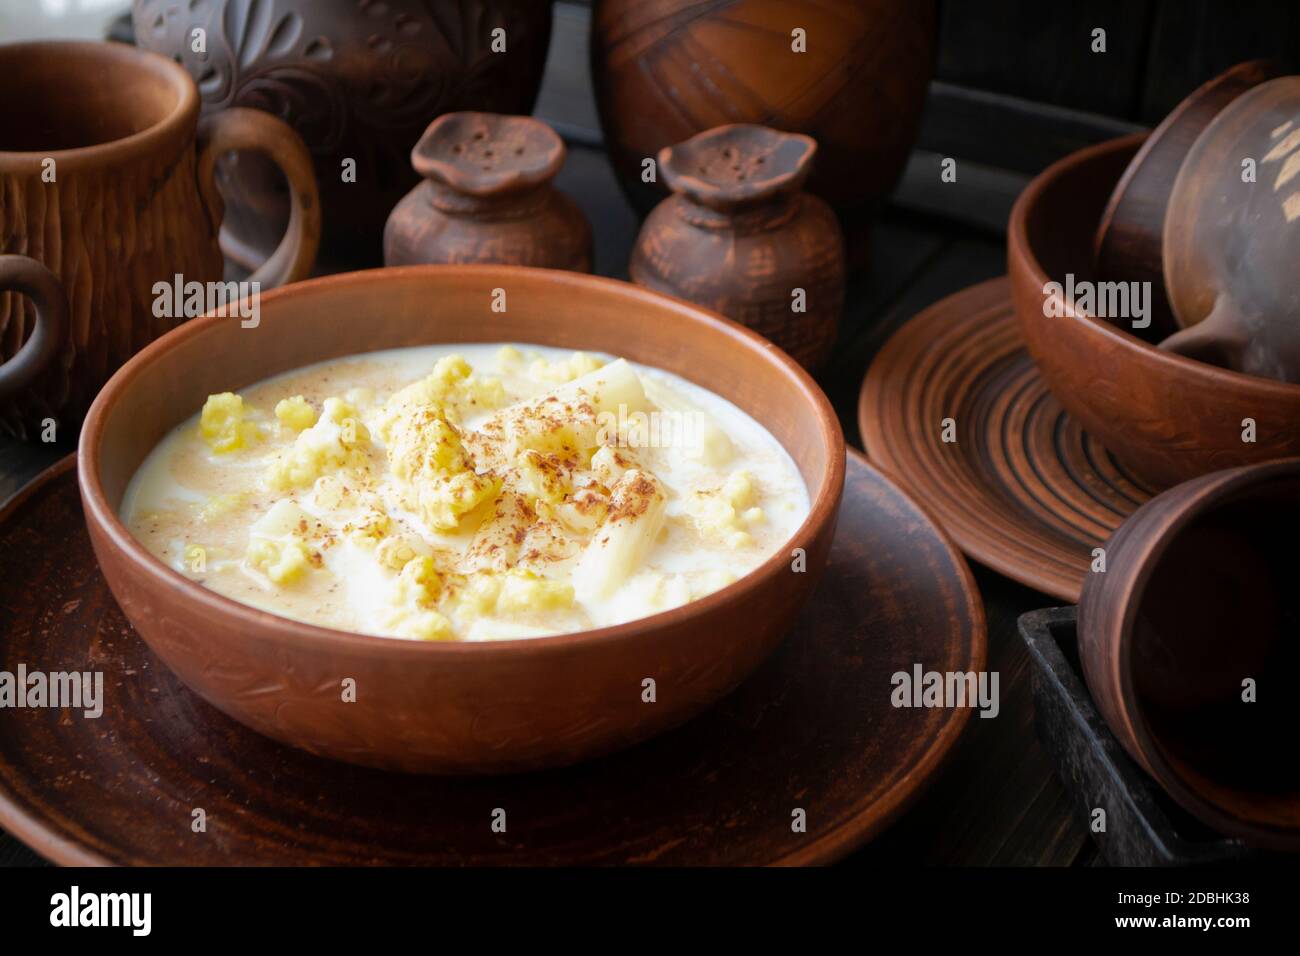 Milk soup with cocoa powder in an old ceramic bowl, dark background Stock Photo